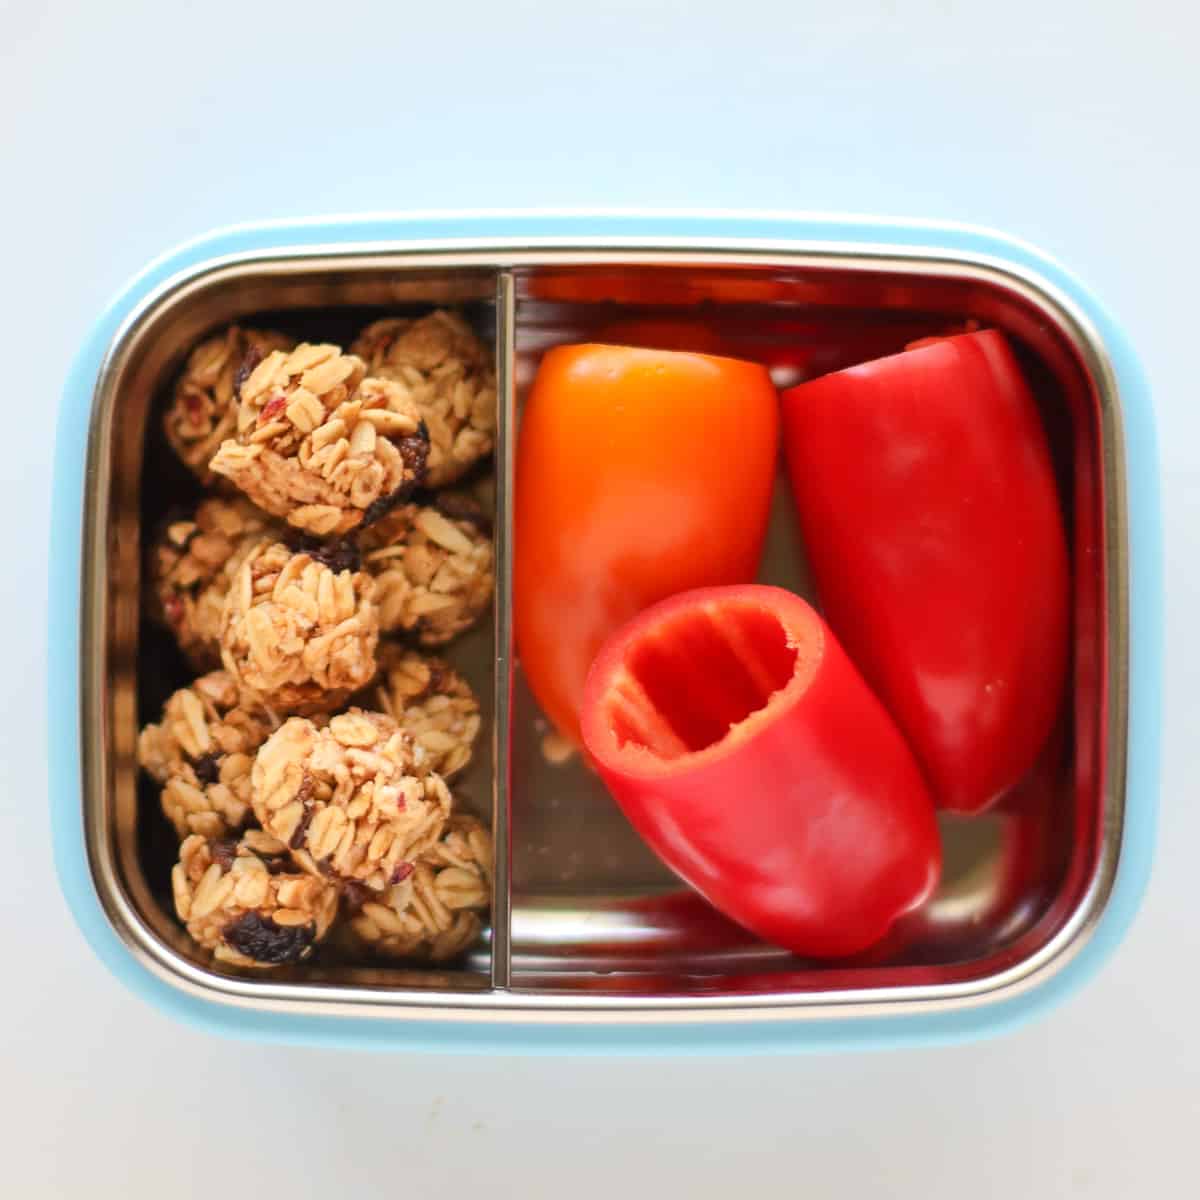 Mini granola bites with 3 mini bell peppers with seeds removed.